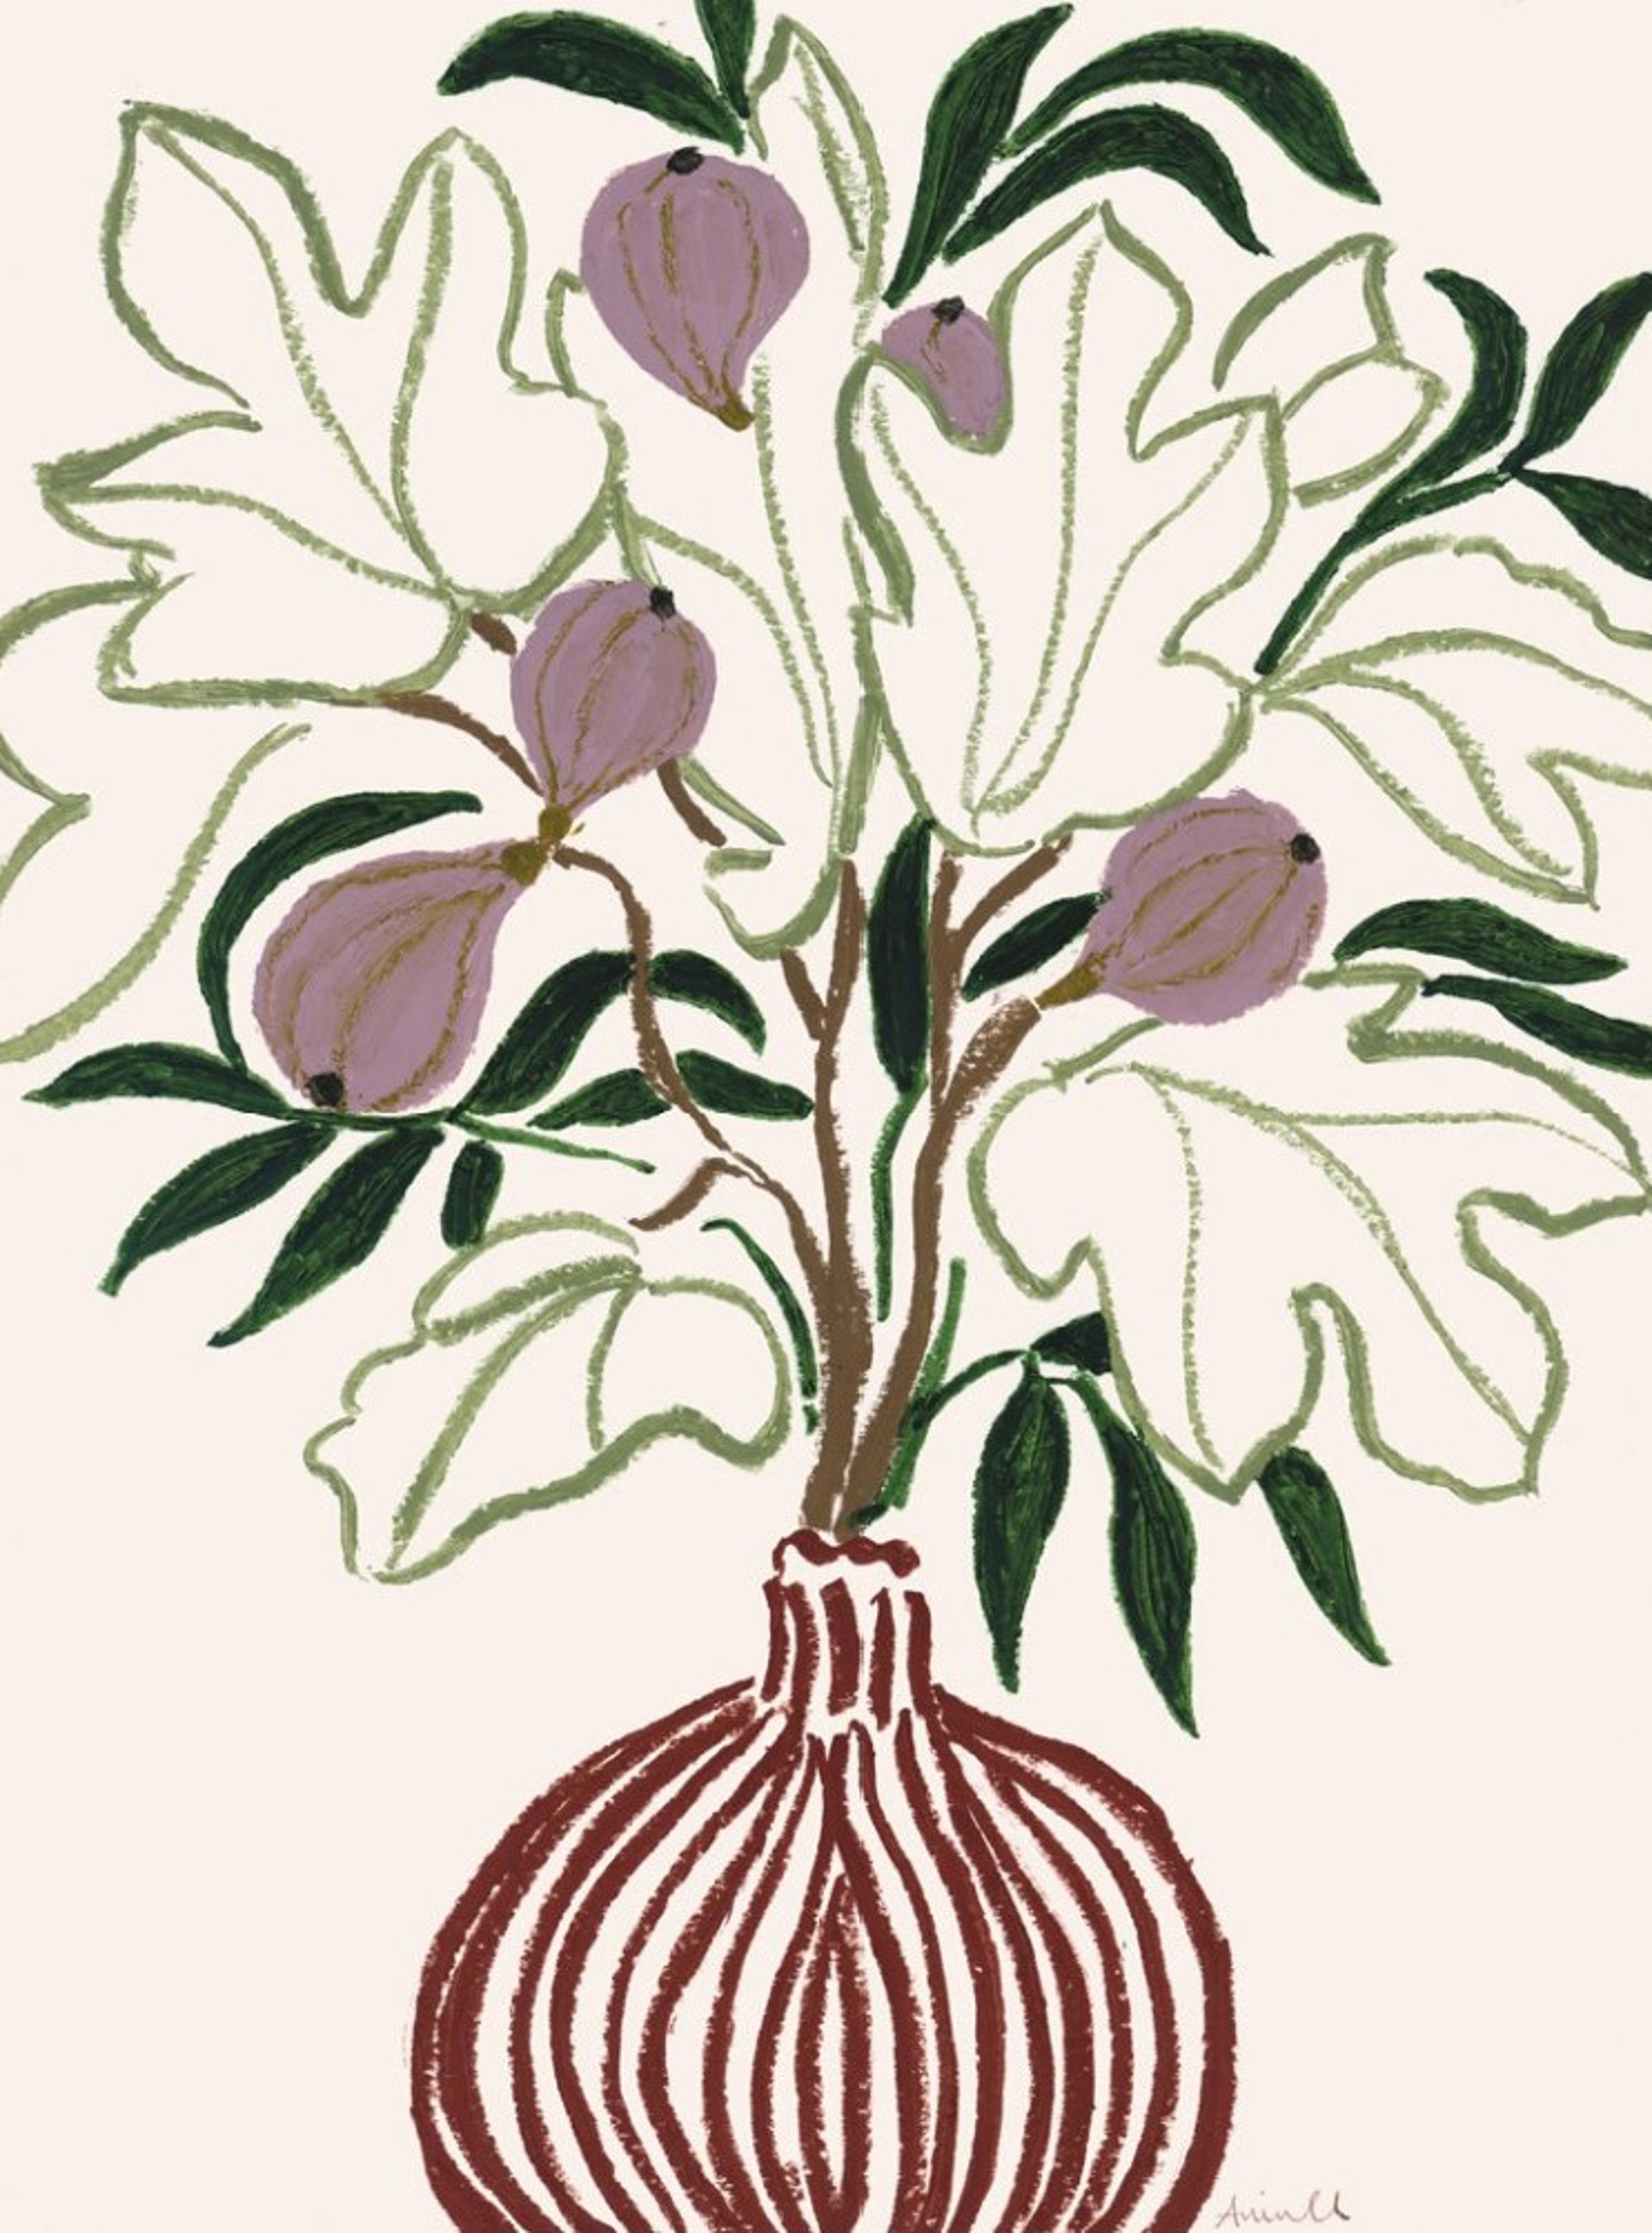 Spring Figs by Anine Cecilie Iversen